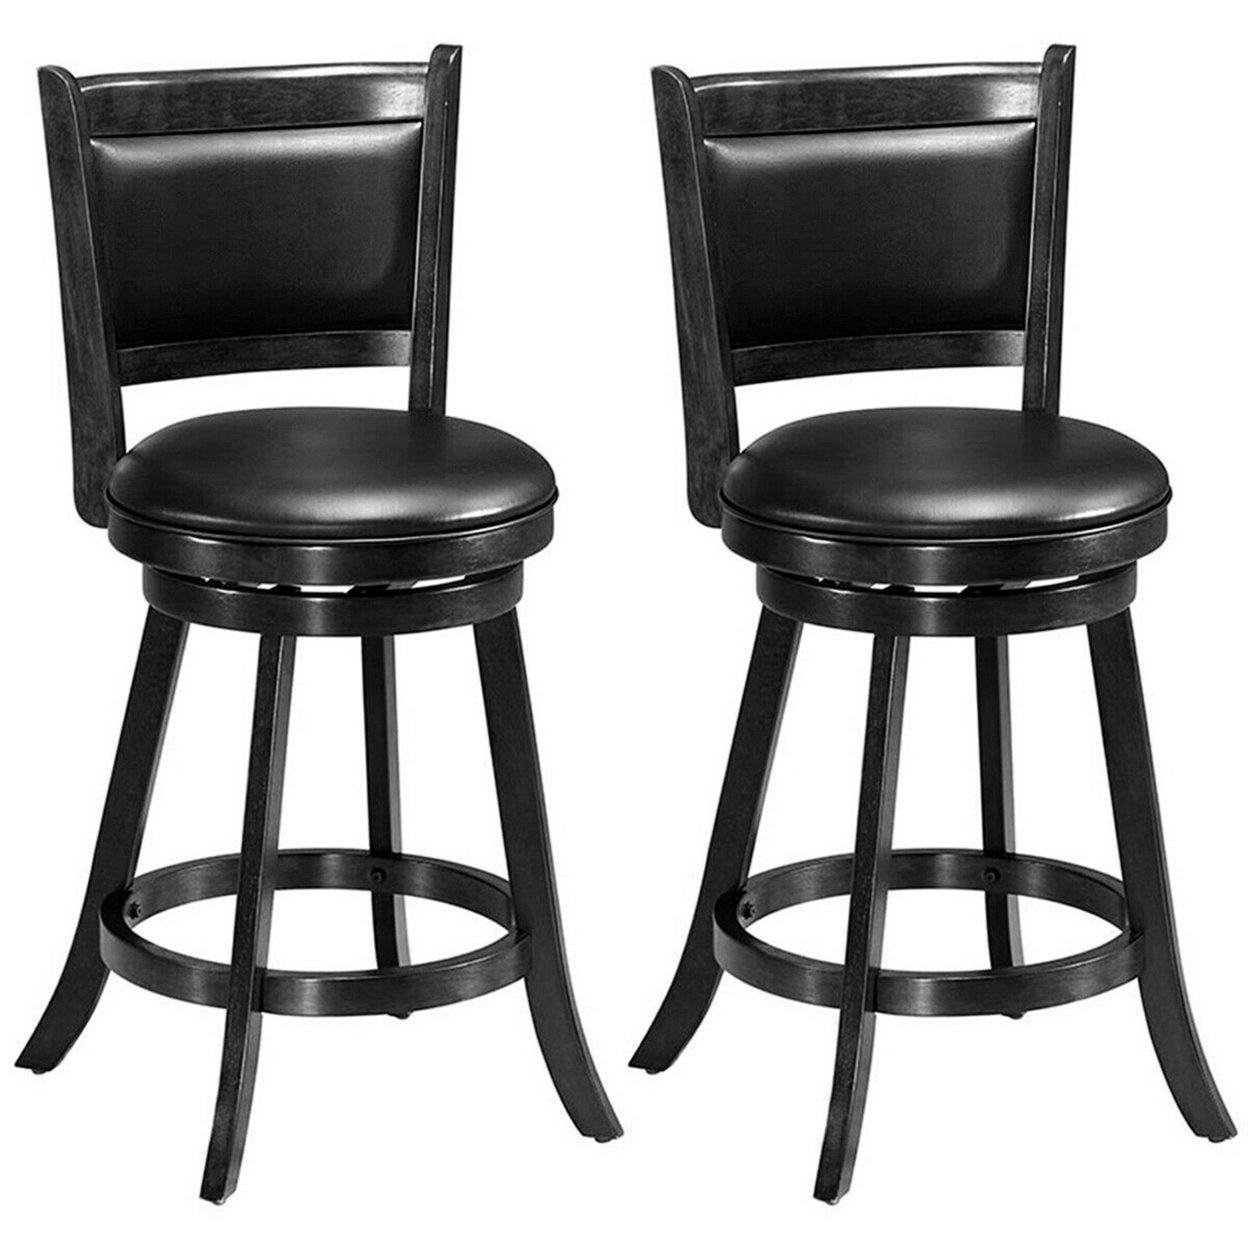 2PCS 24'' Swivel Counter Stool Dining Chair Upholstered Seat Black